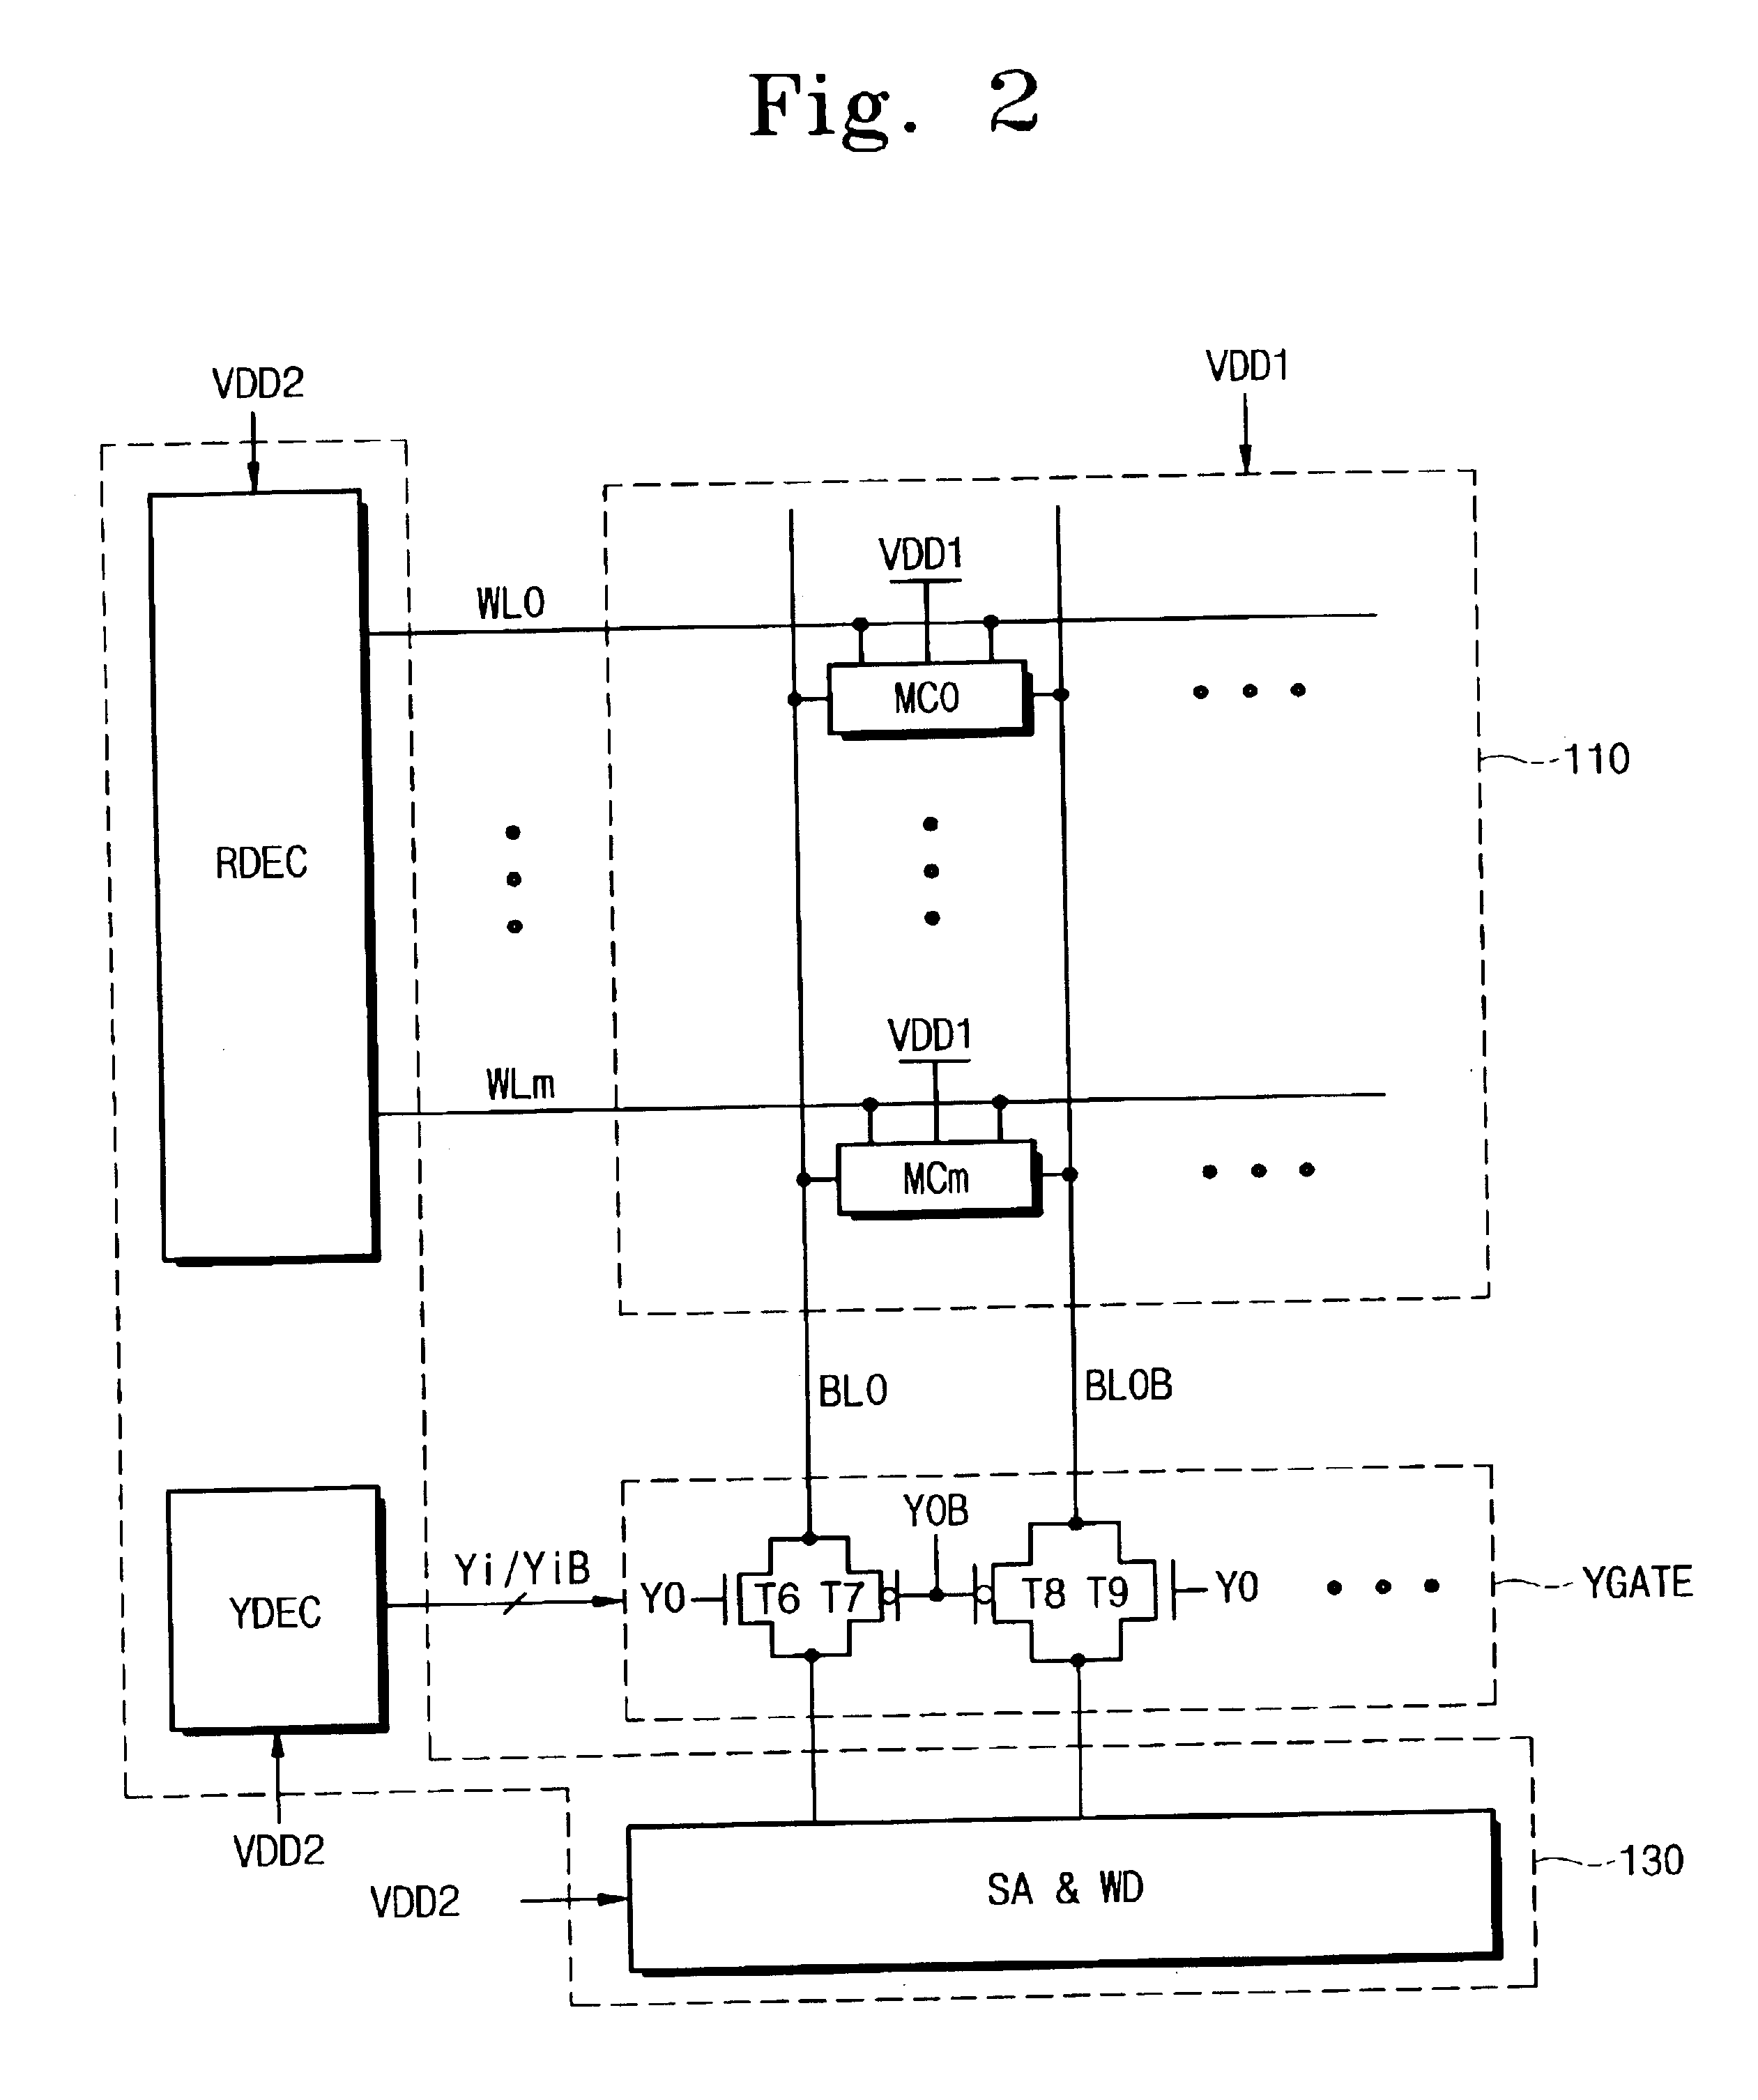 Semiconductor memory device with internal voltage generators for testing a memory array and peripheral circuits